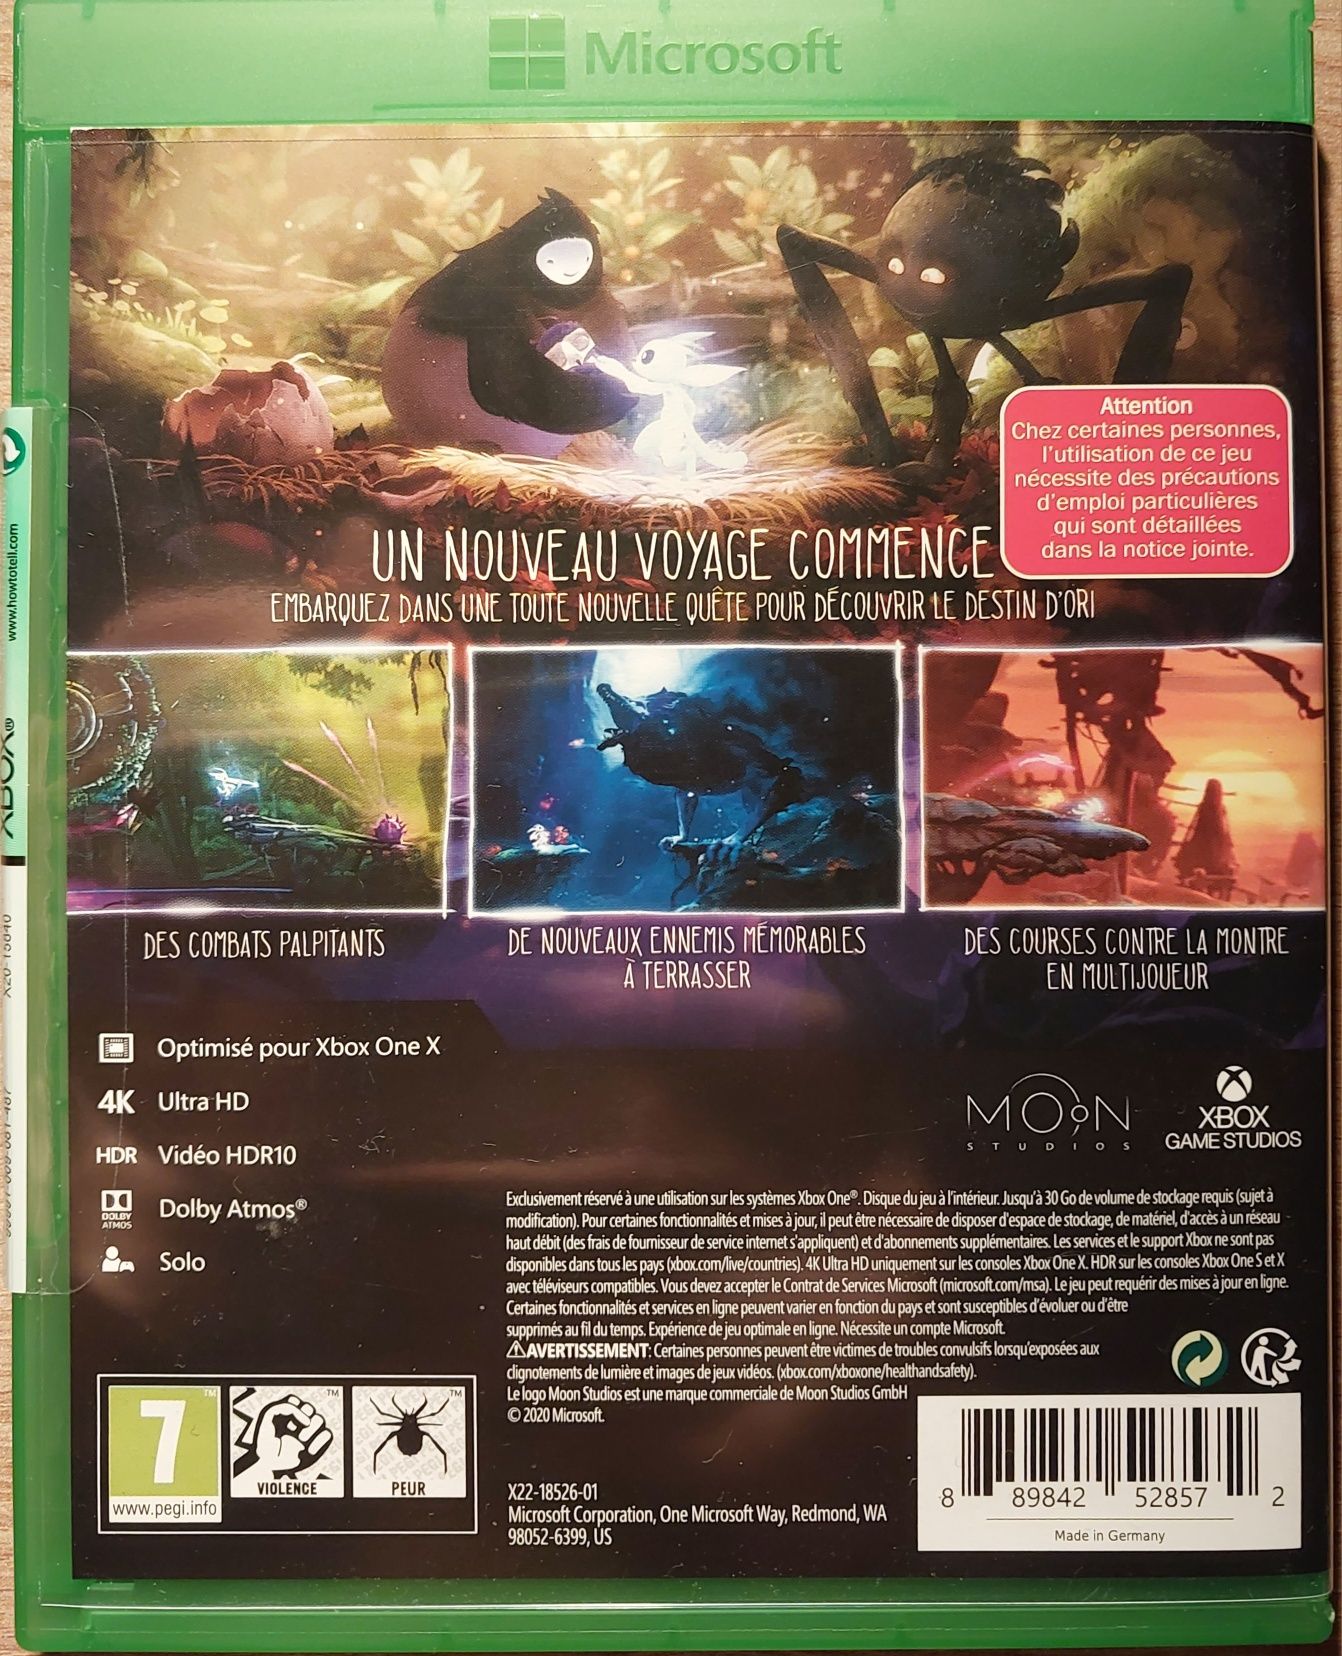 Gra na Xbox One. Ori and the Will of the Wisps